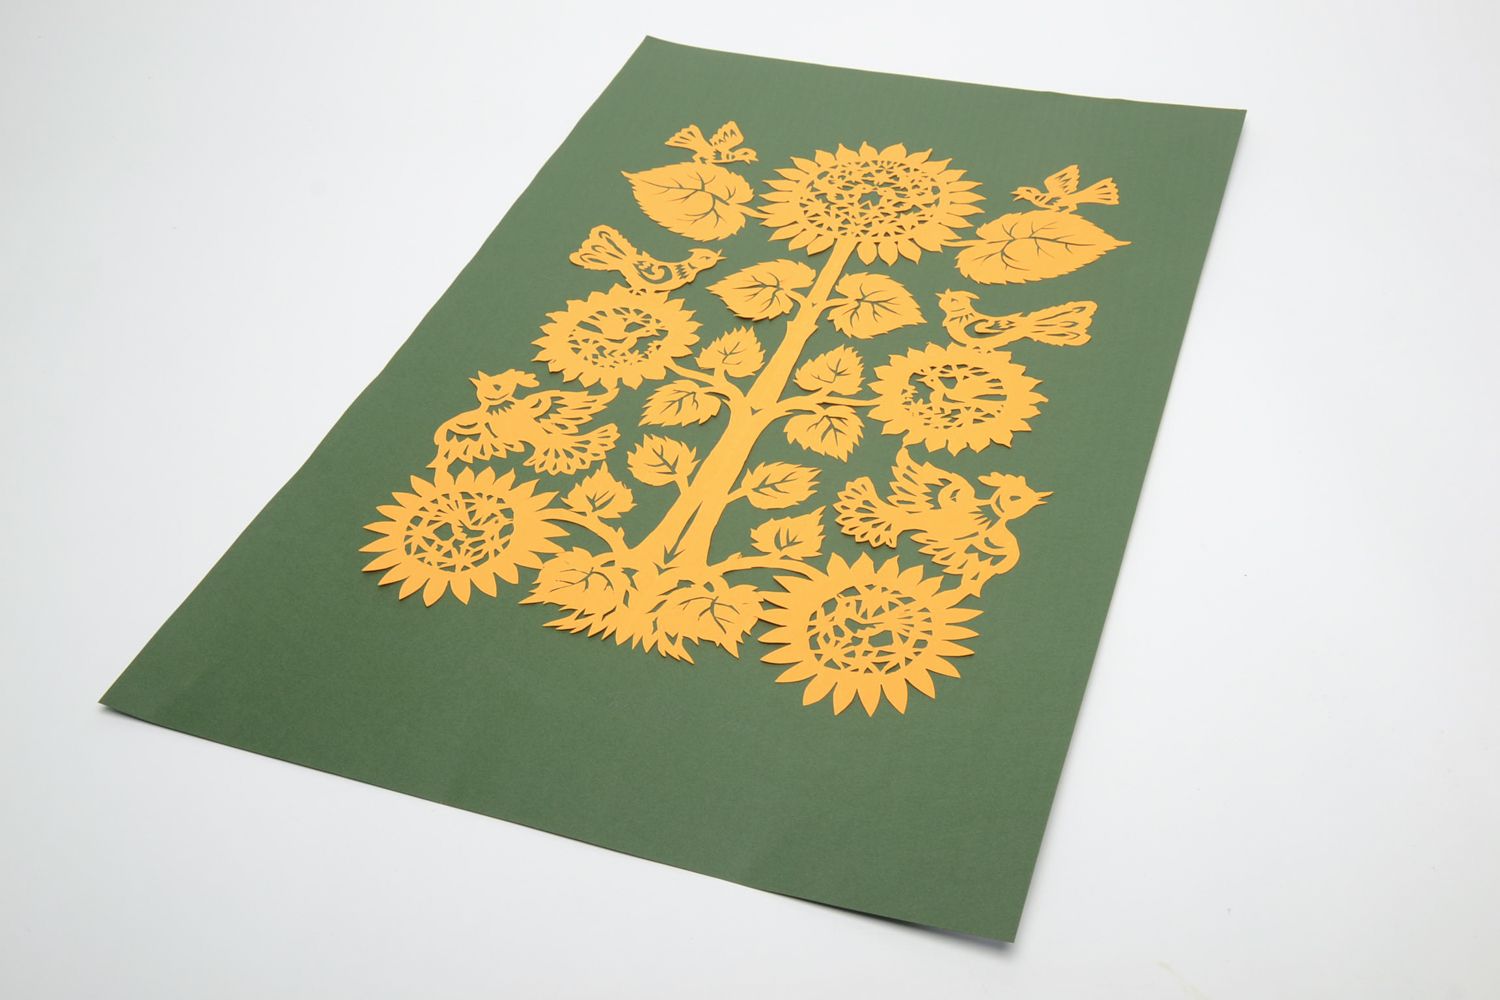 Paper cut out picture vitinanka on green background Tree of Life photo 2